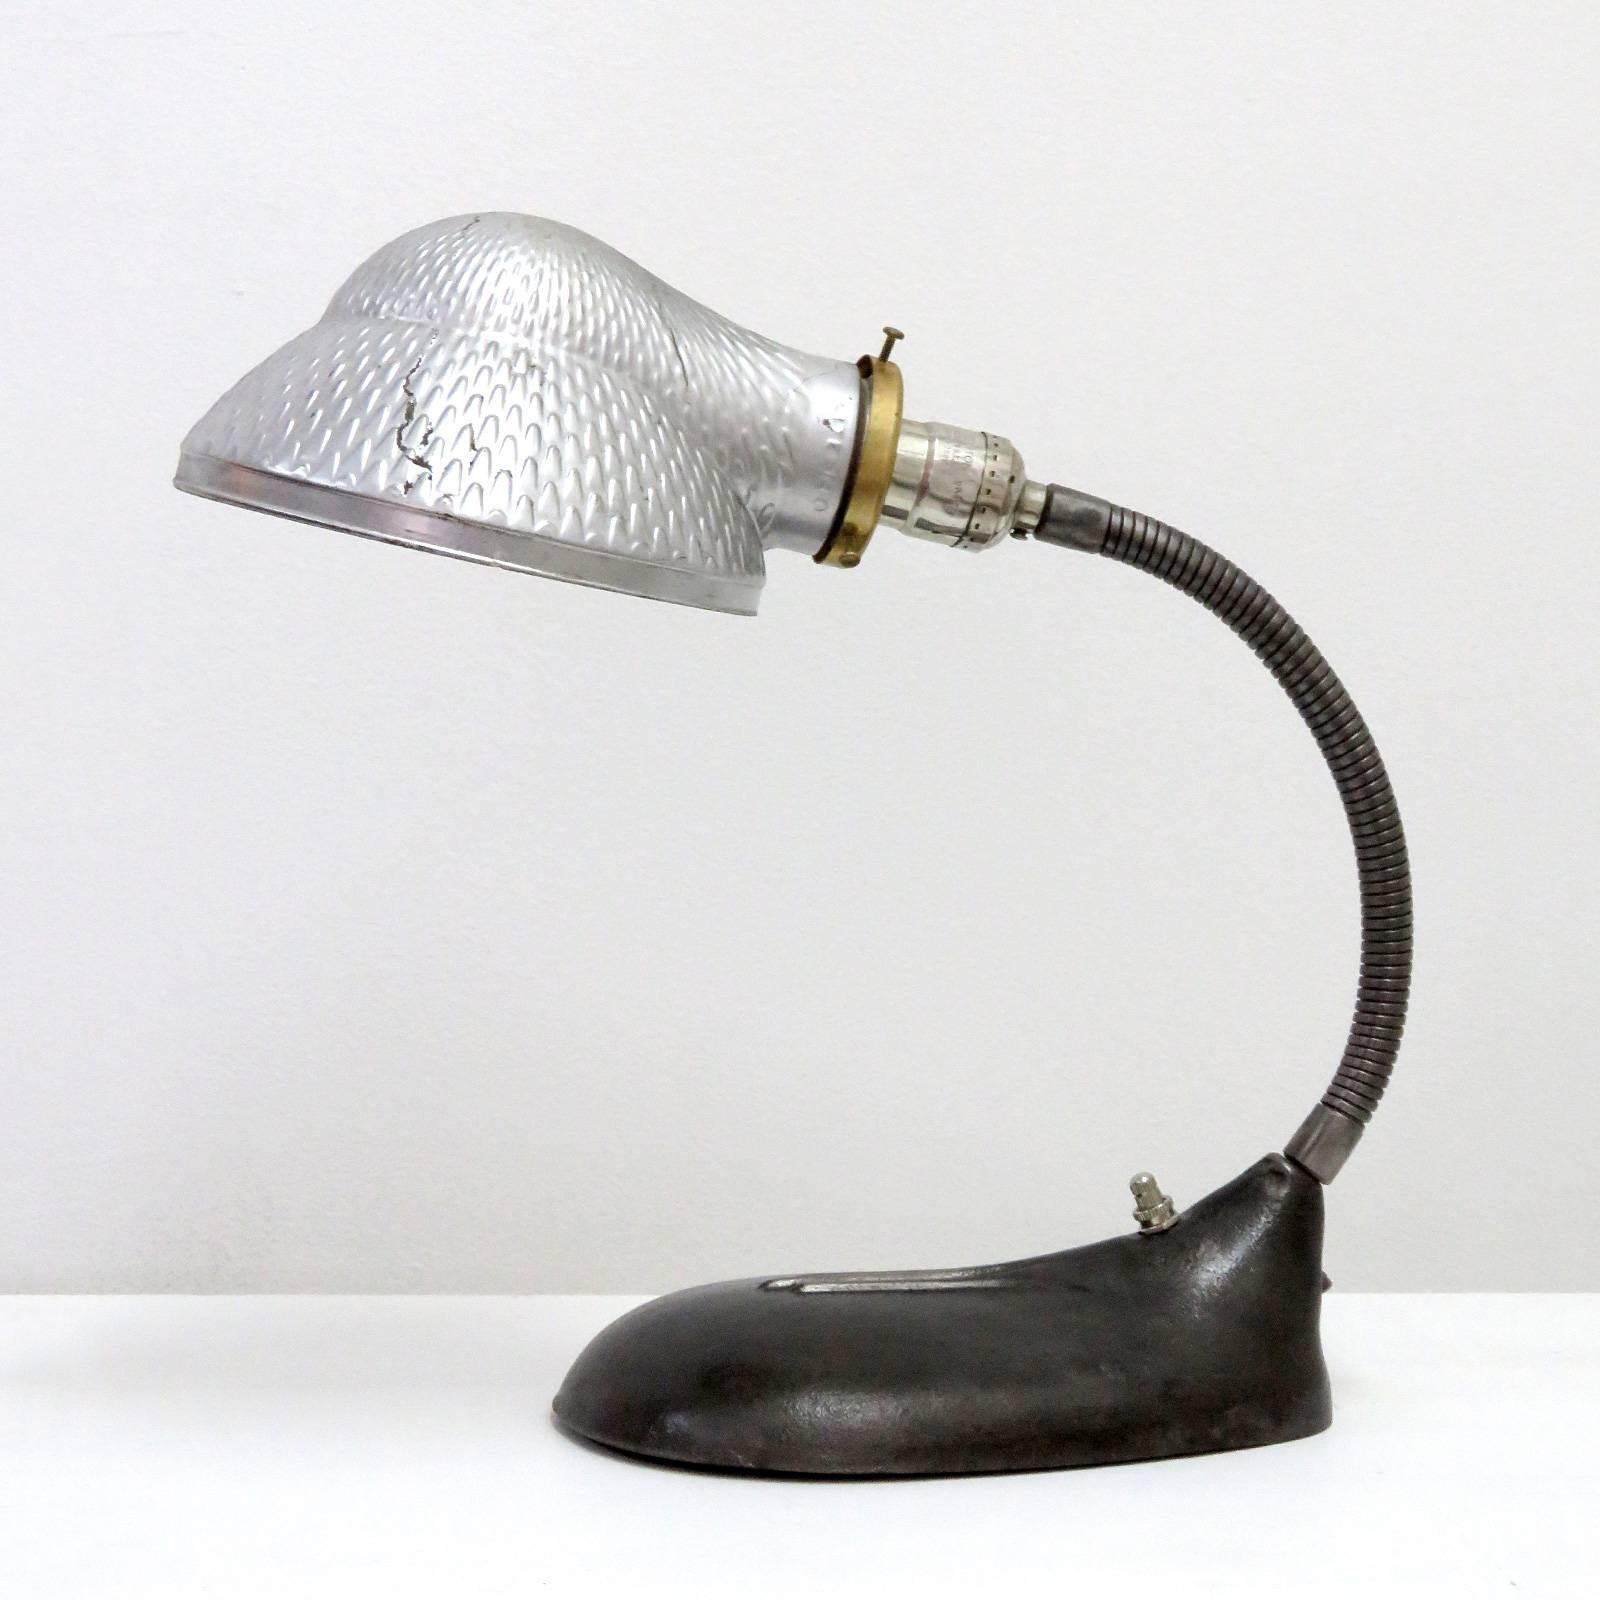 Striking mercury glass shade table lamp with goose neck arm and oversized steel base, new socket and brass shade holder.